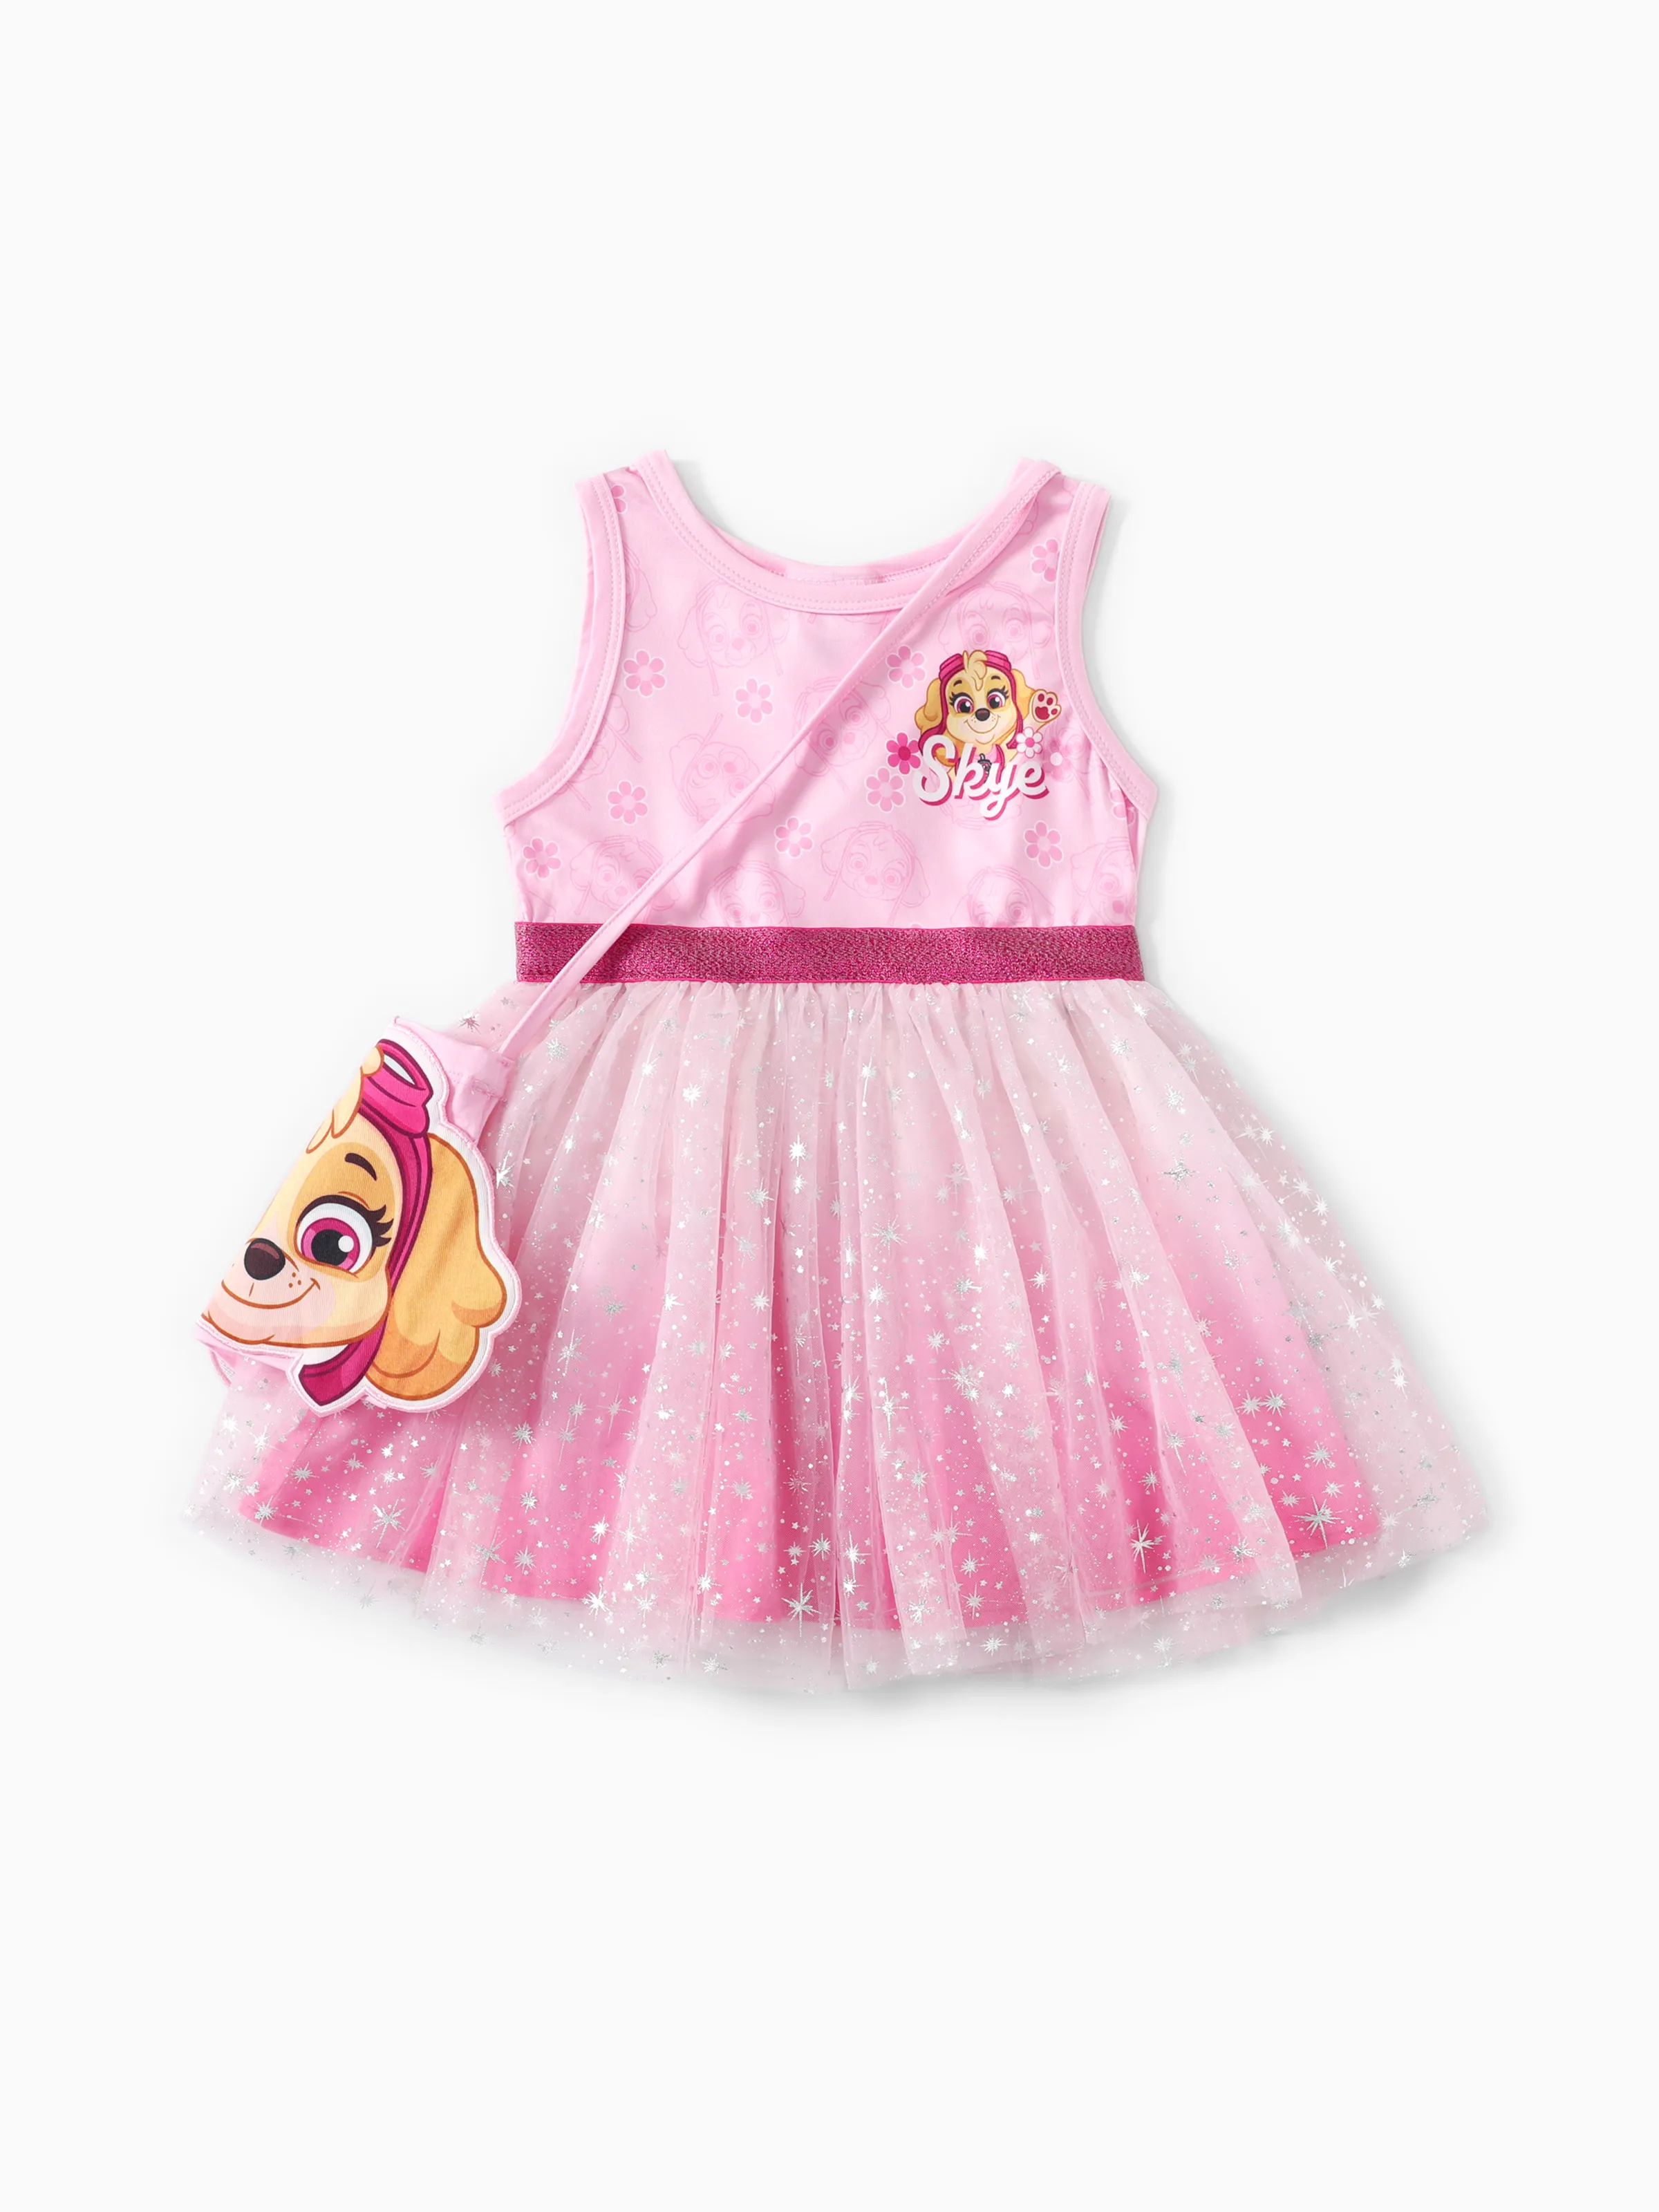 

Paw Patrol Toddler Girls 2pcs Character Print Floral Sparkle Tulle Dress with Lovely Skye/Everest Bag